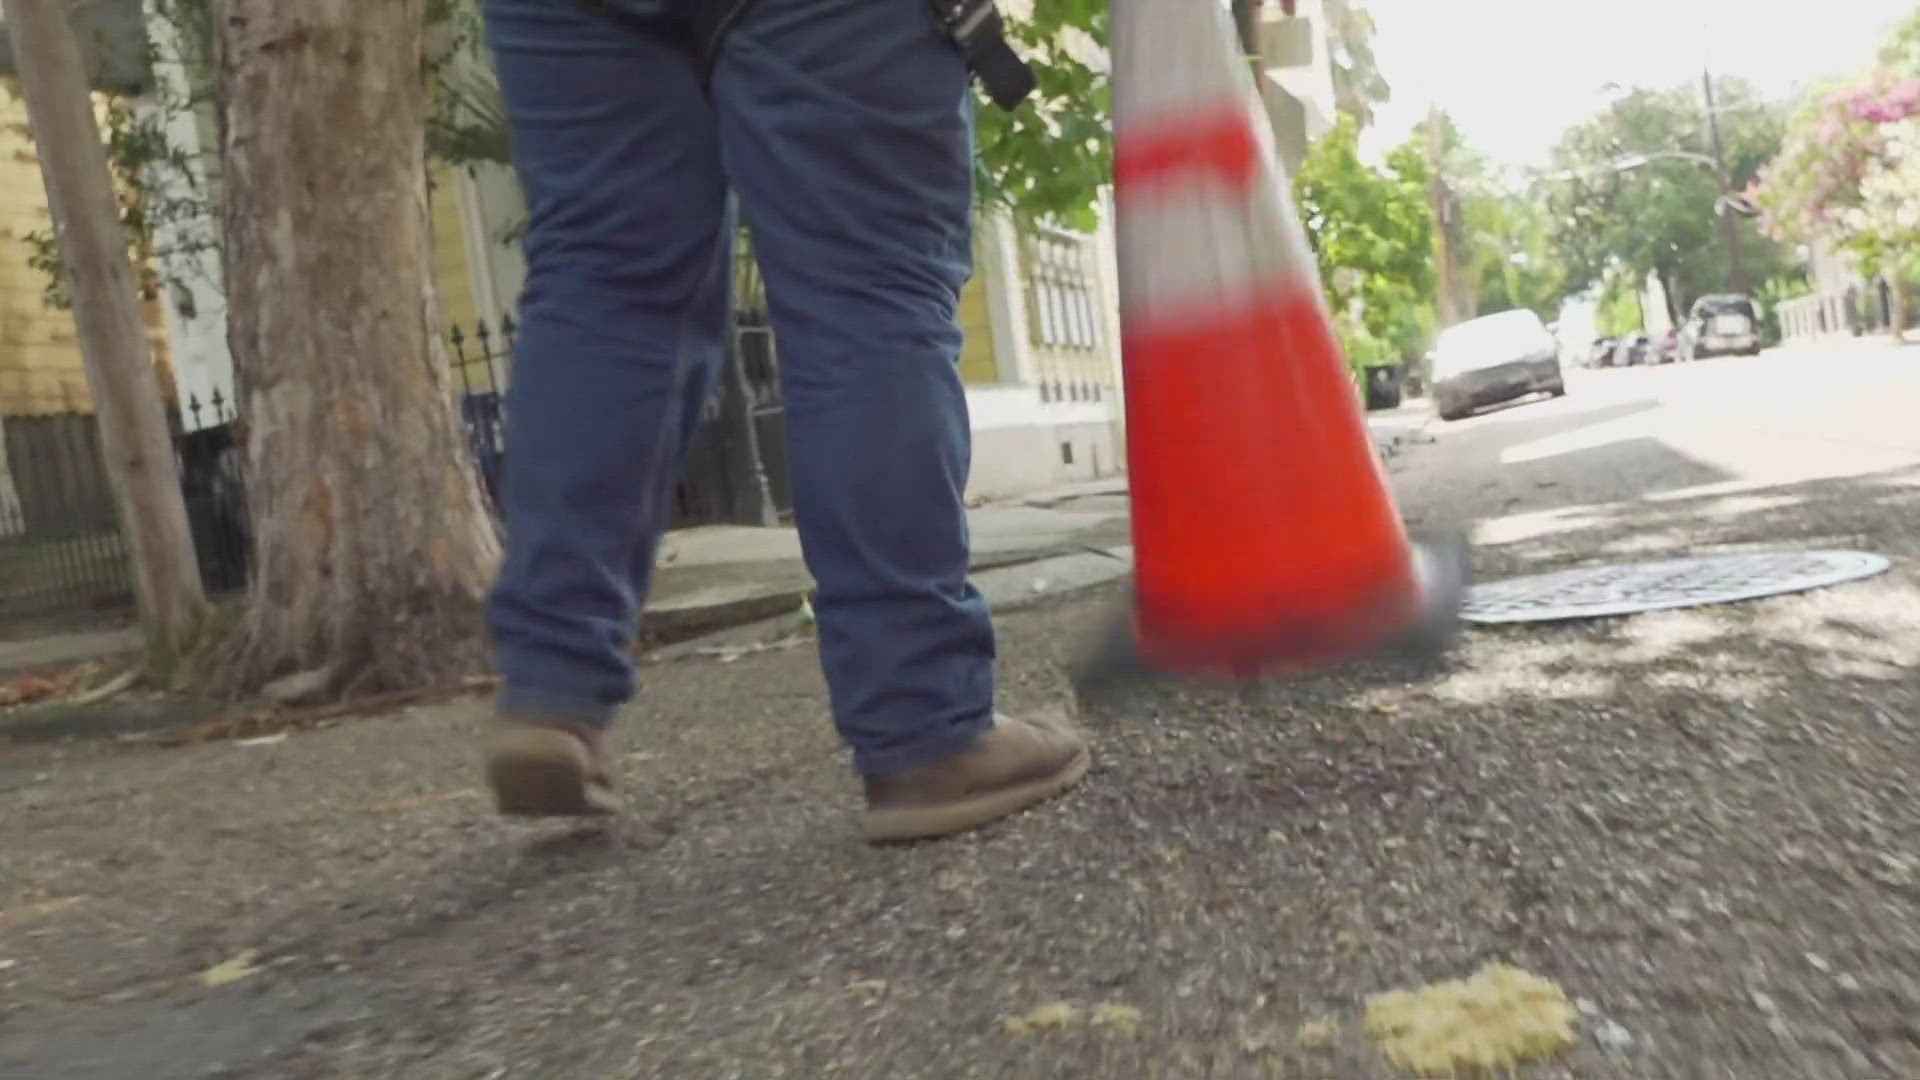 Entergy workers walked the Garden District looking for problems. They are called "walkdowns."